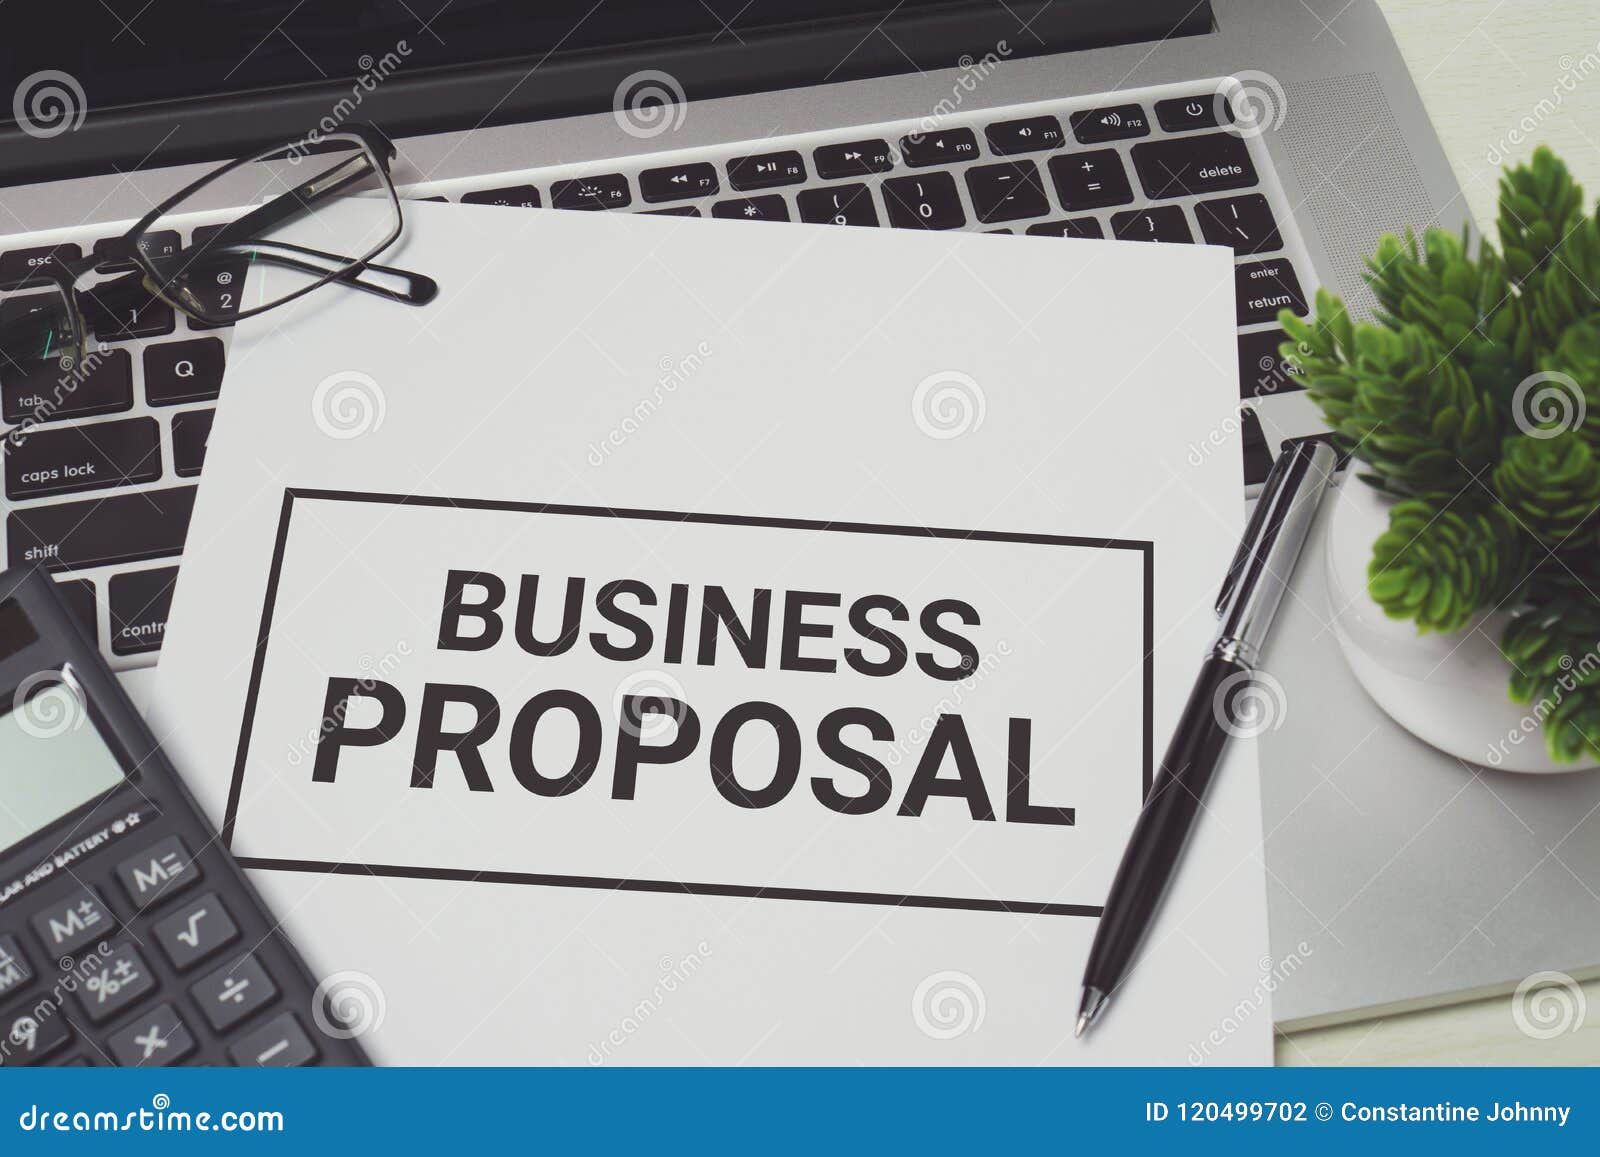 business proposal on white paper.